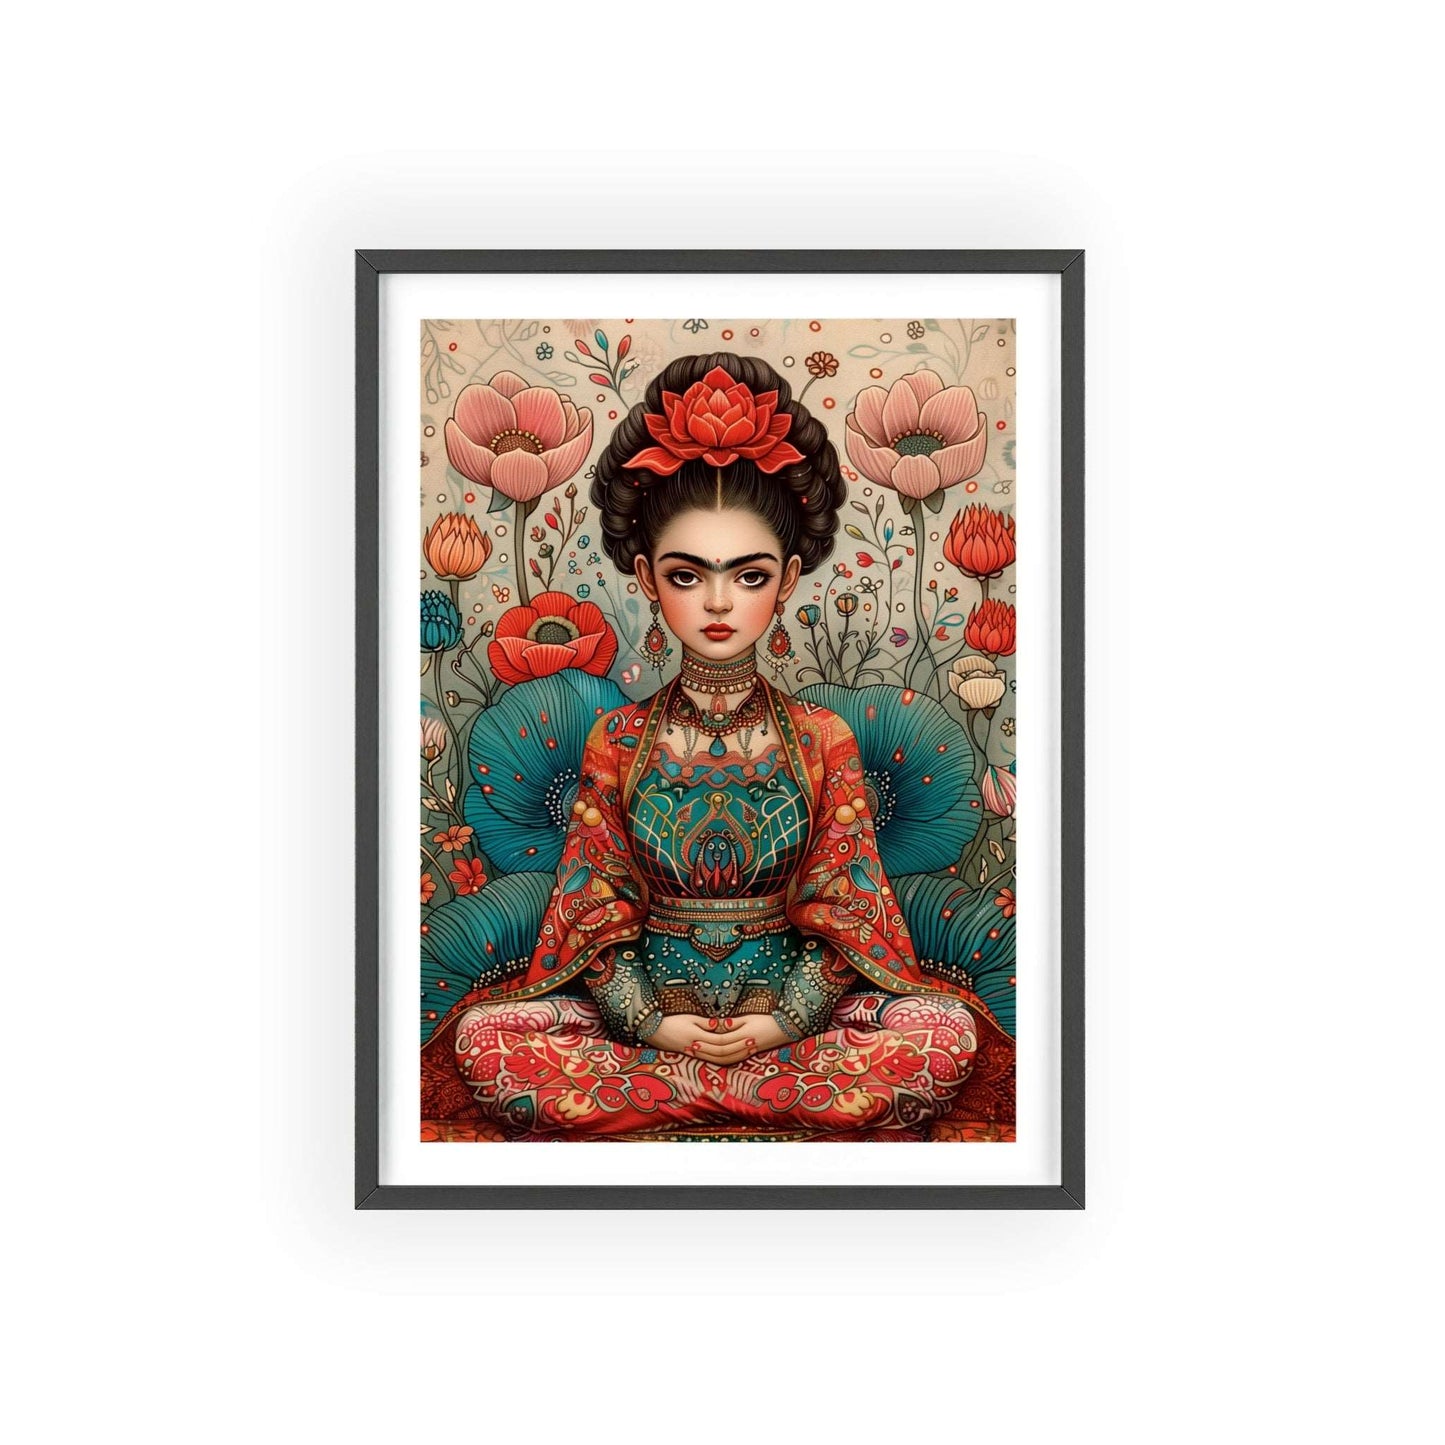 Framed poster featuring a young Frida Kahlo in a meditative pose. She is depicted in a modern vector design with a muted color palette.